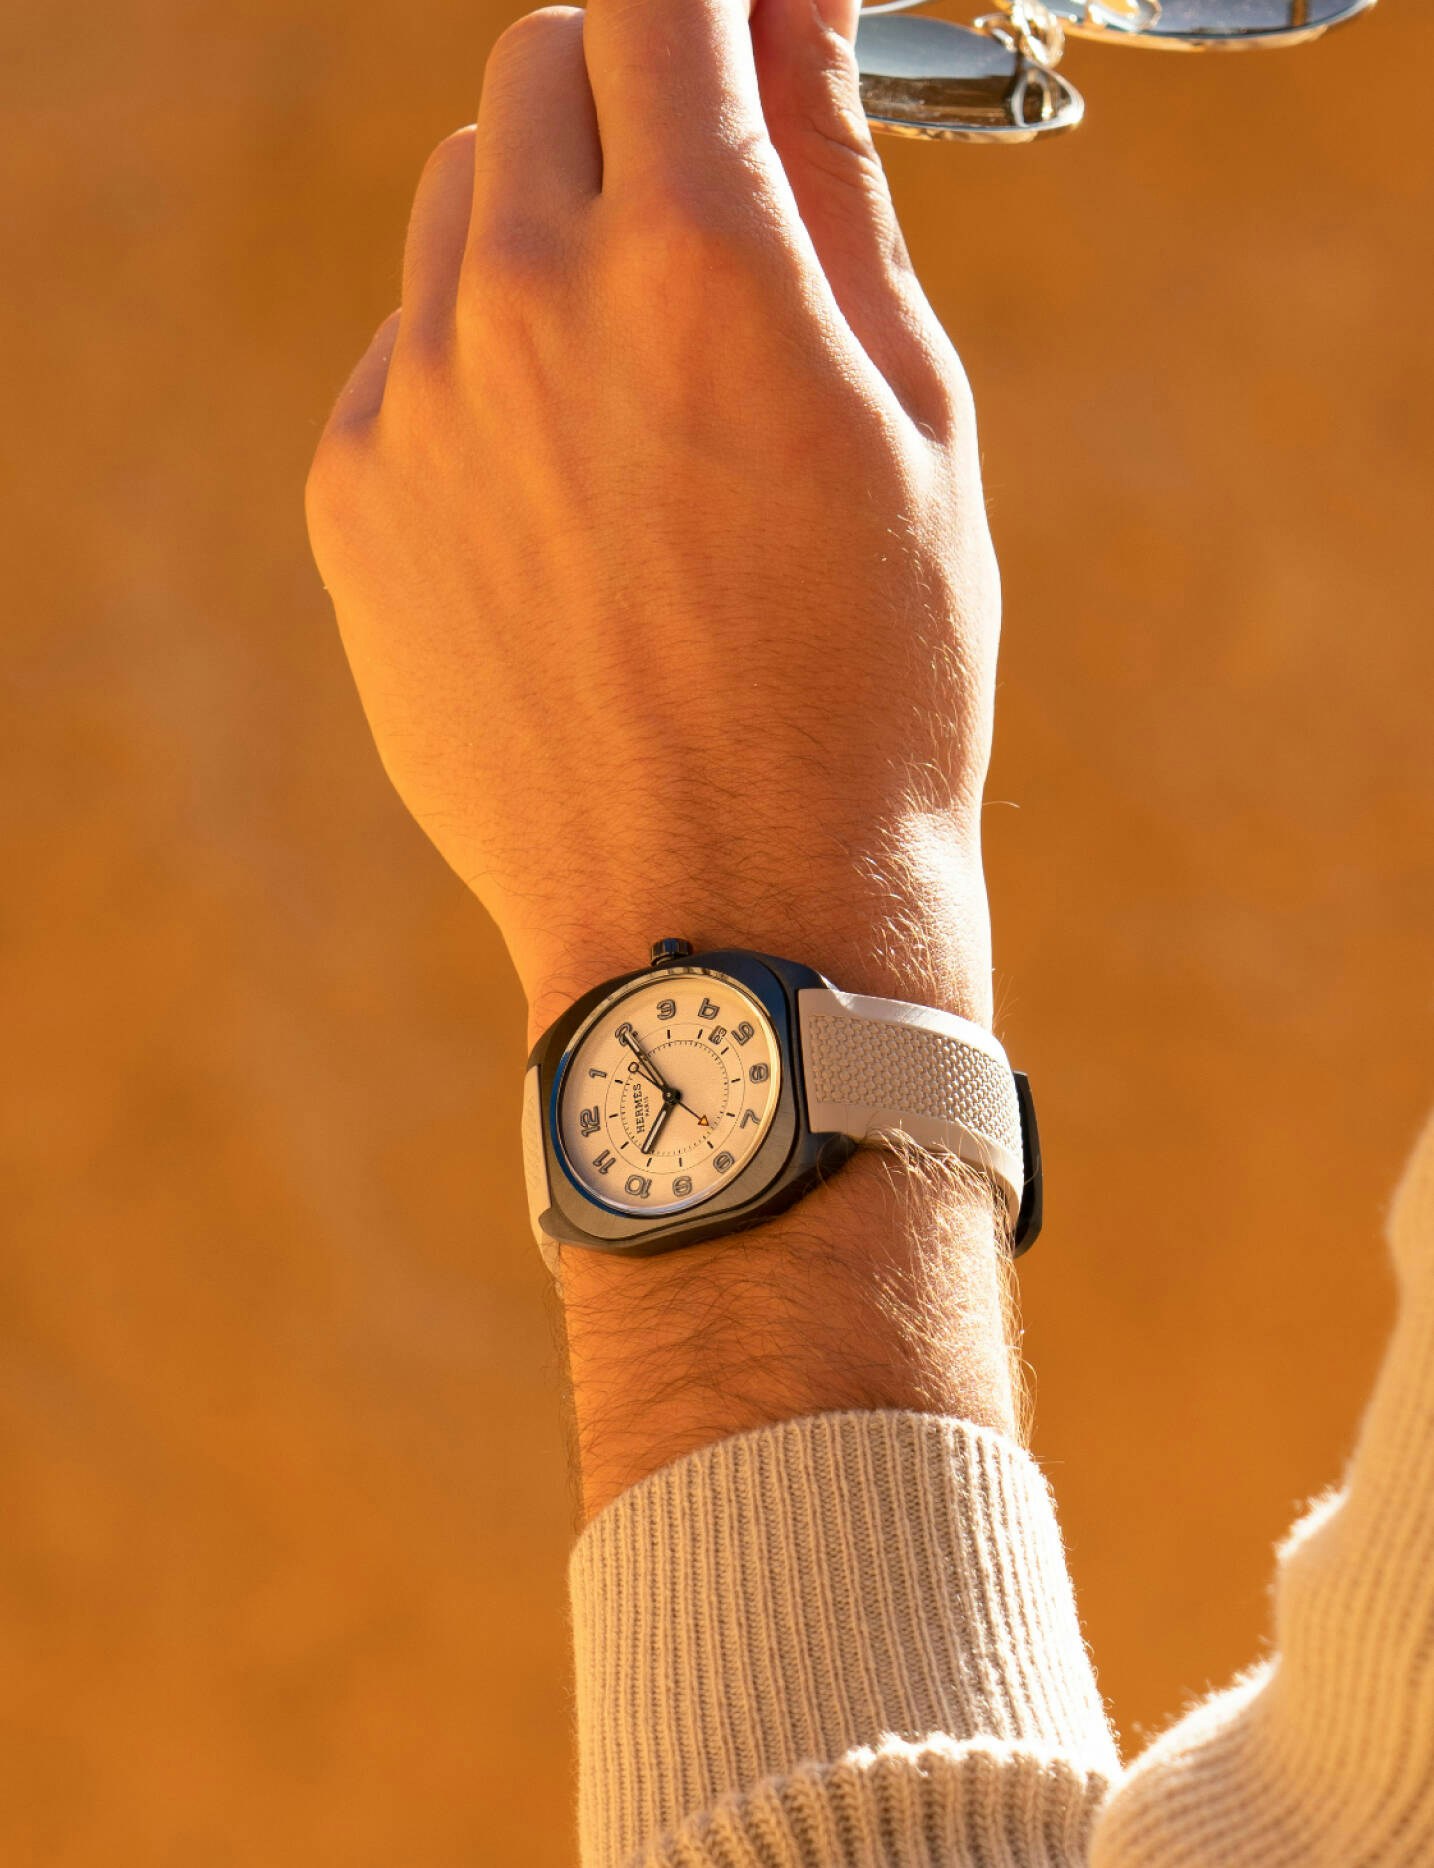 HODINKEE and Hermès Limited Edition H08 Watch